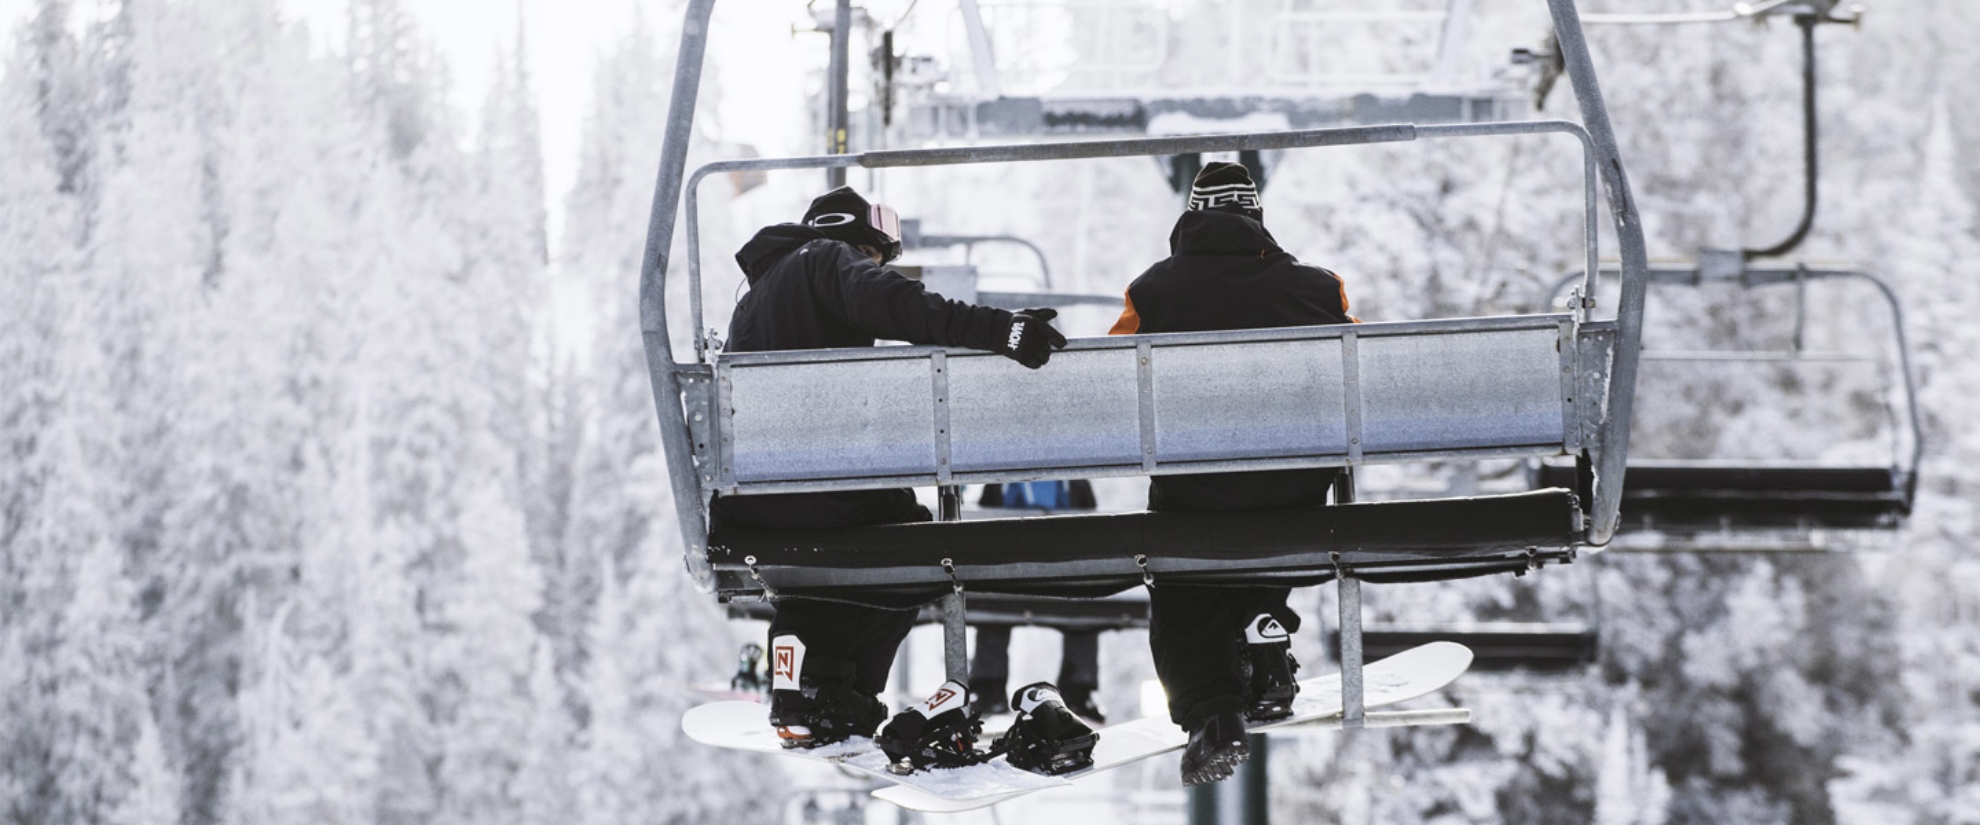 Snowboarders riding a snowy lift at Brighton Resort